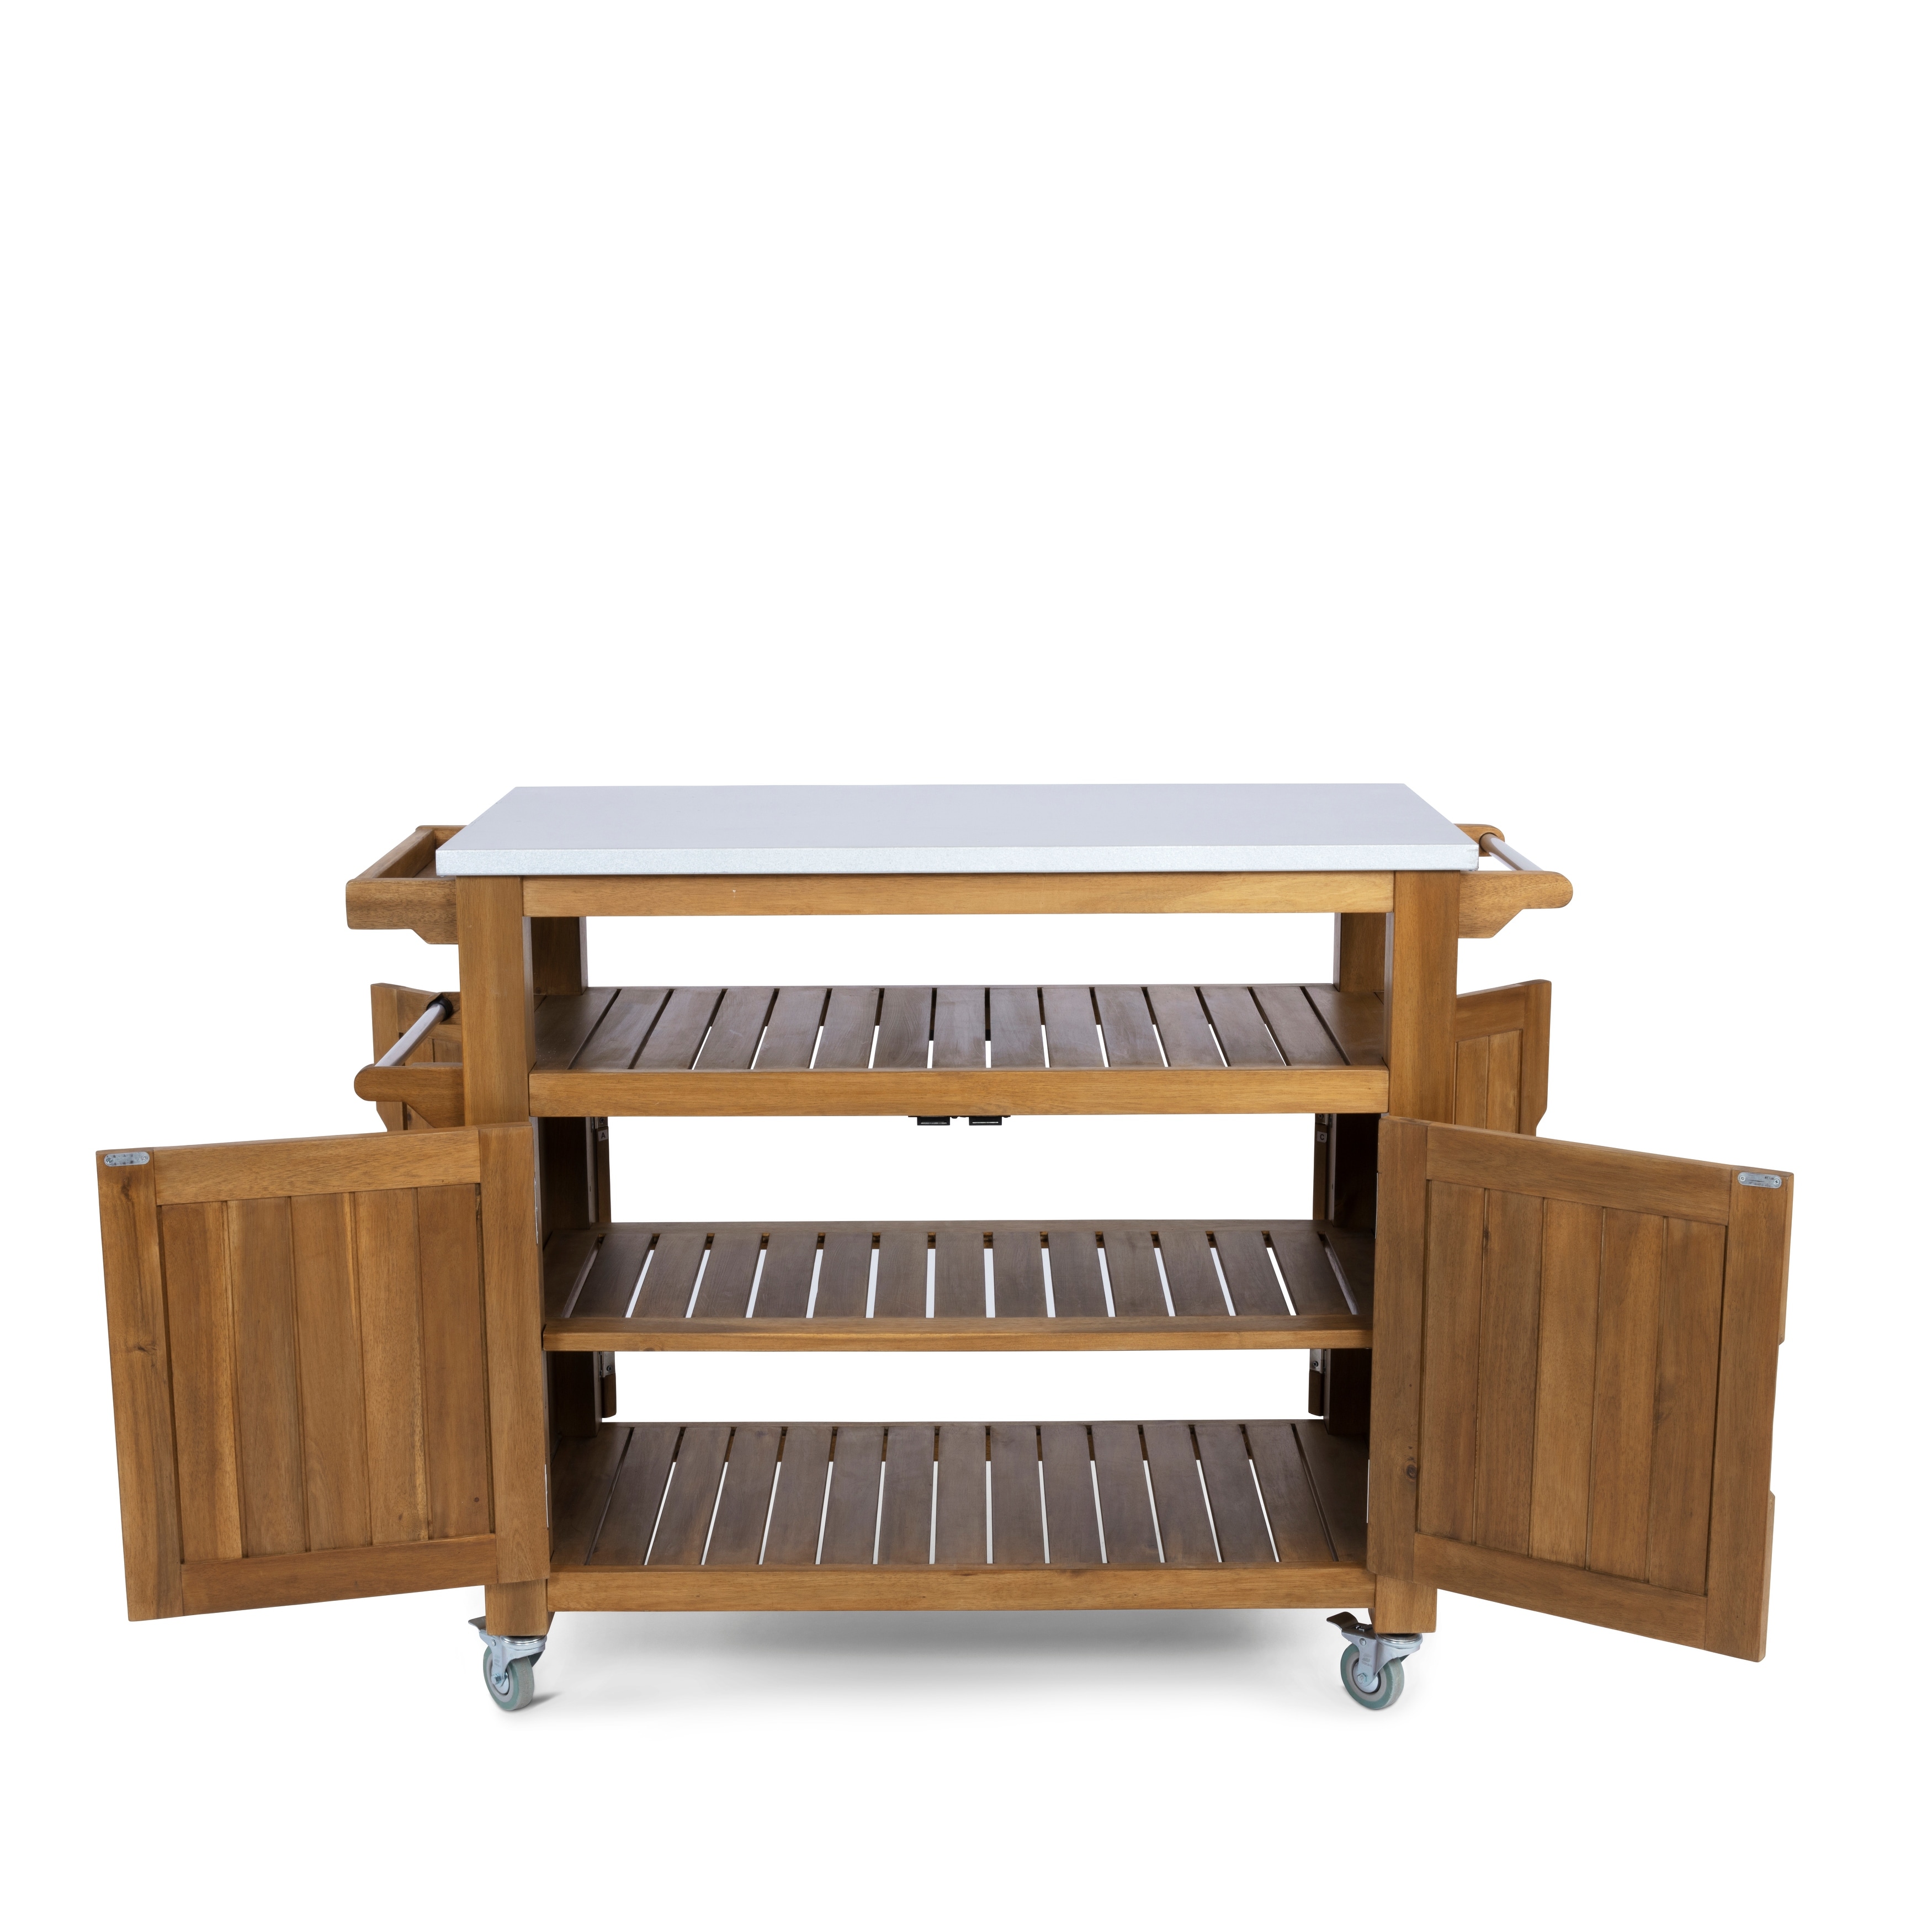 https://ak1.ostkcdn.com/images/products/is/images/direct/8346066a6a27d672572be44c9c7142b8b4f84481/Maho-Golden-Teak-Outdoor-Barbeque-Cart.jpg